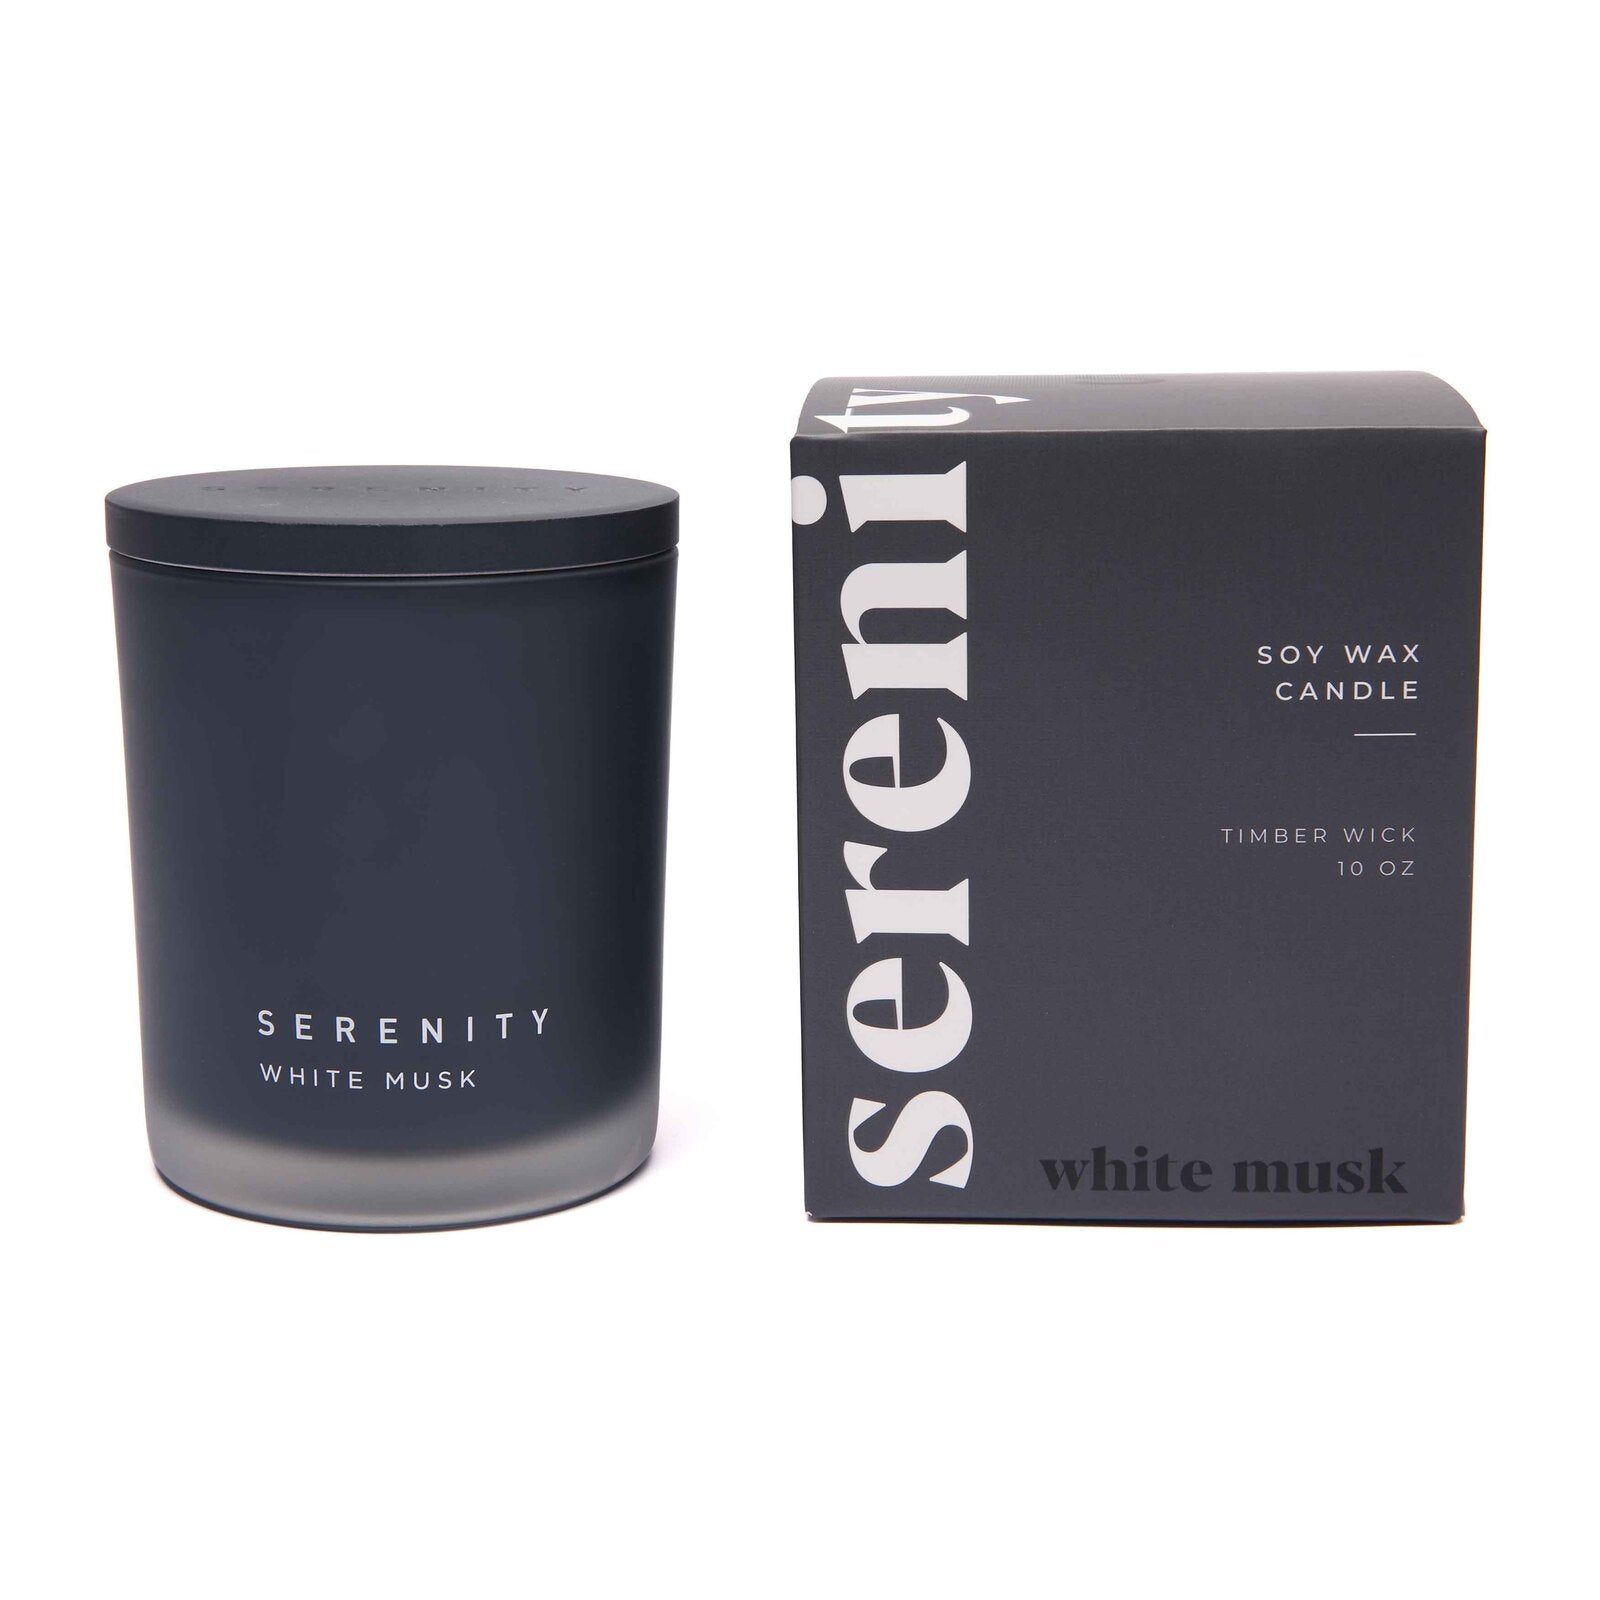 White Musk Serenity Scented Jar Candle